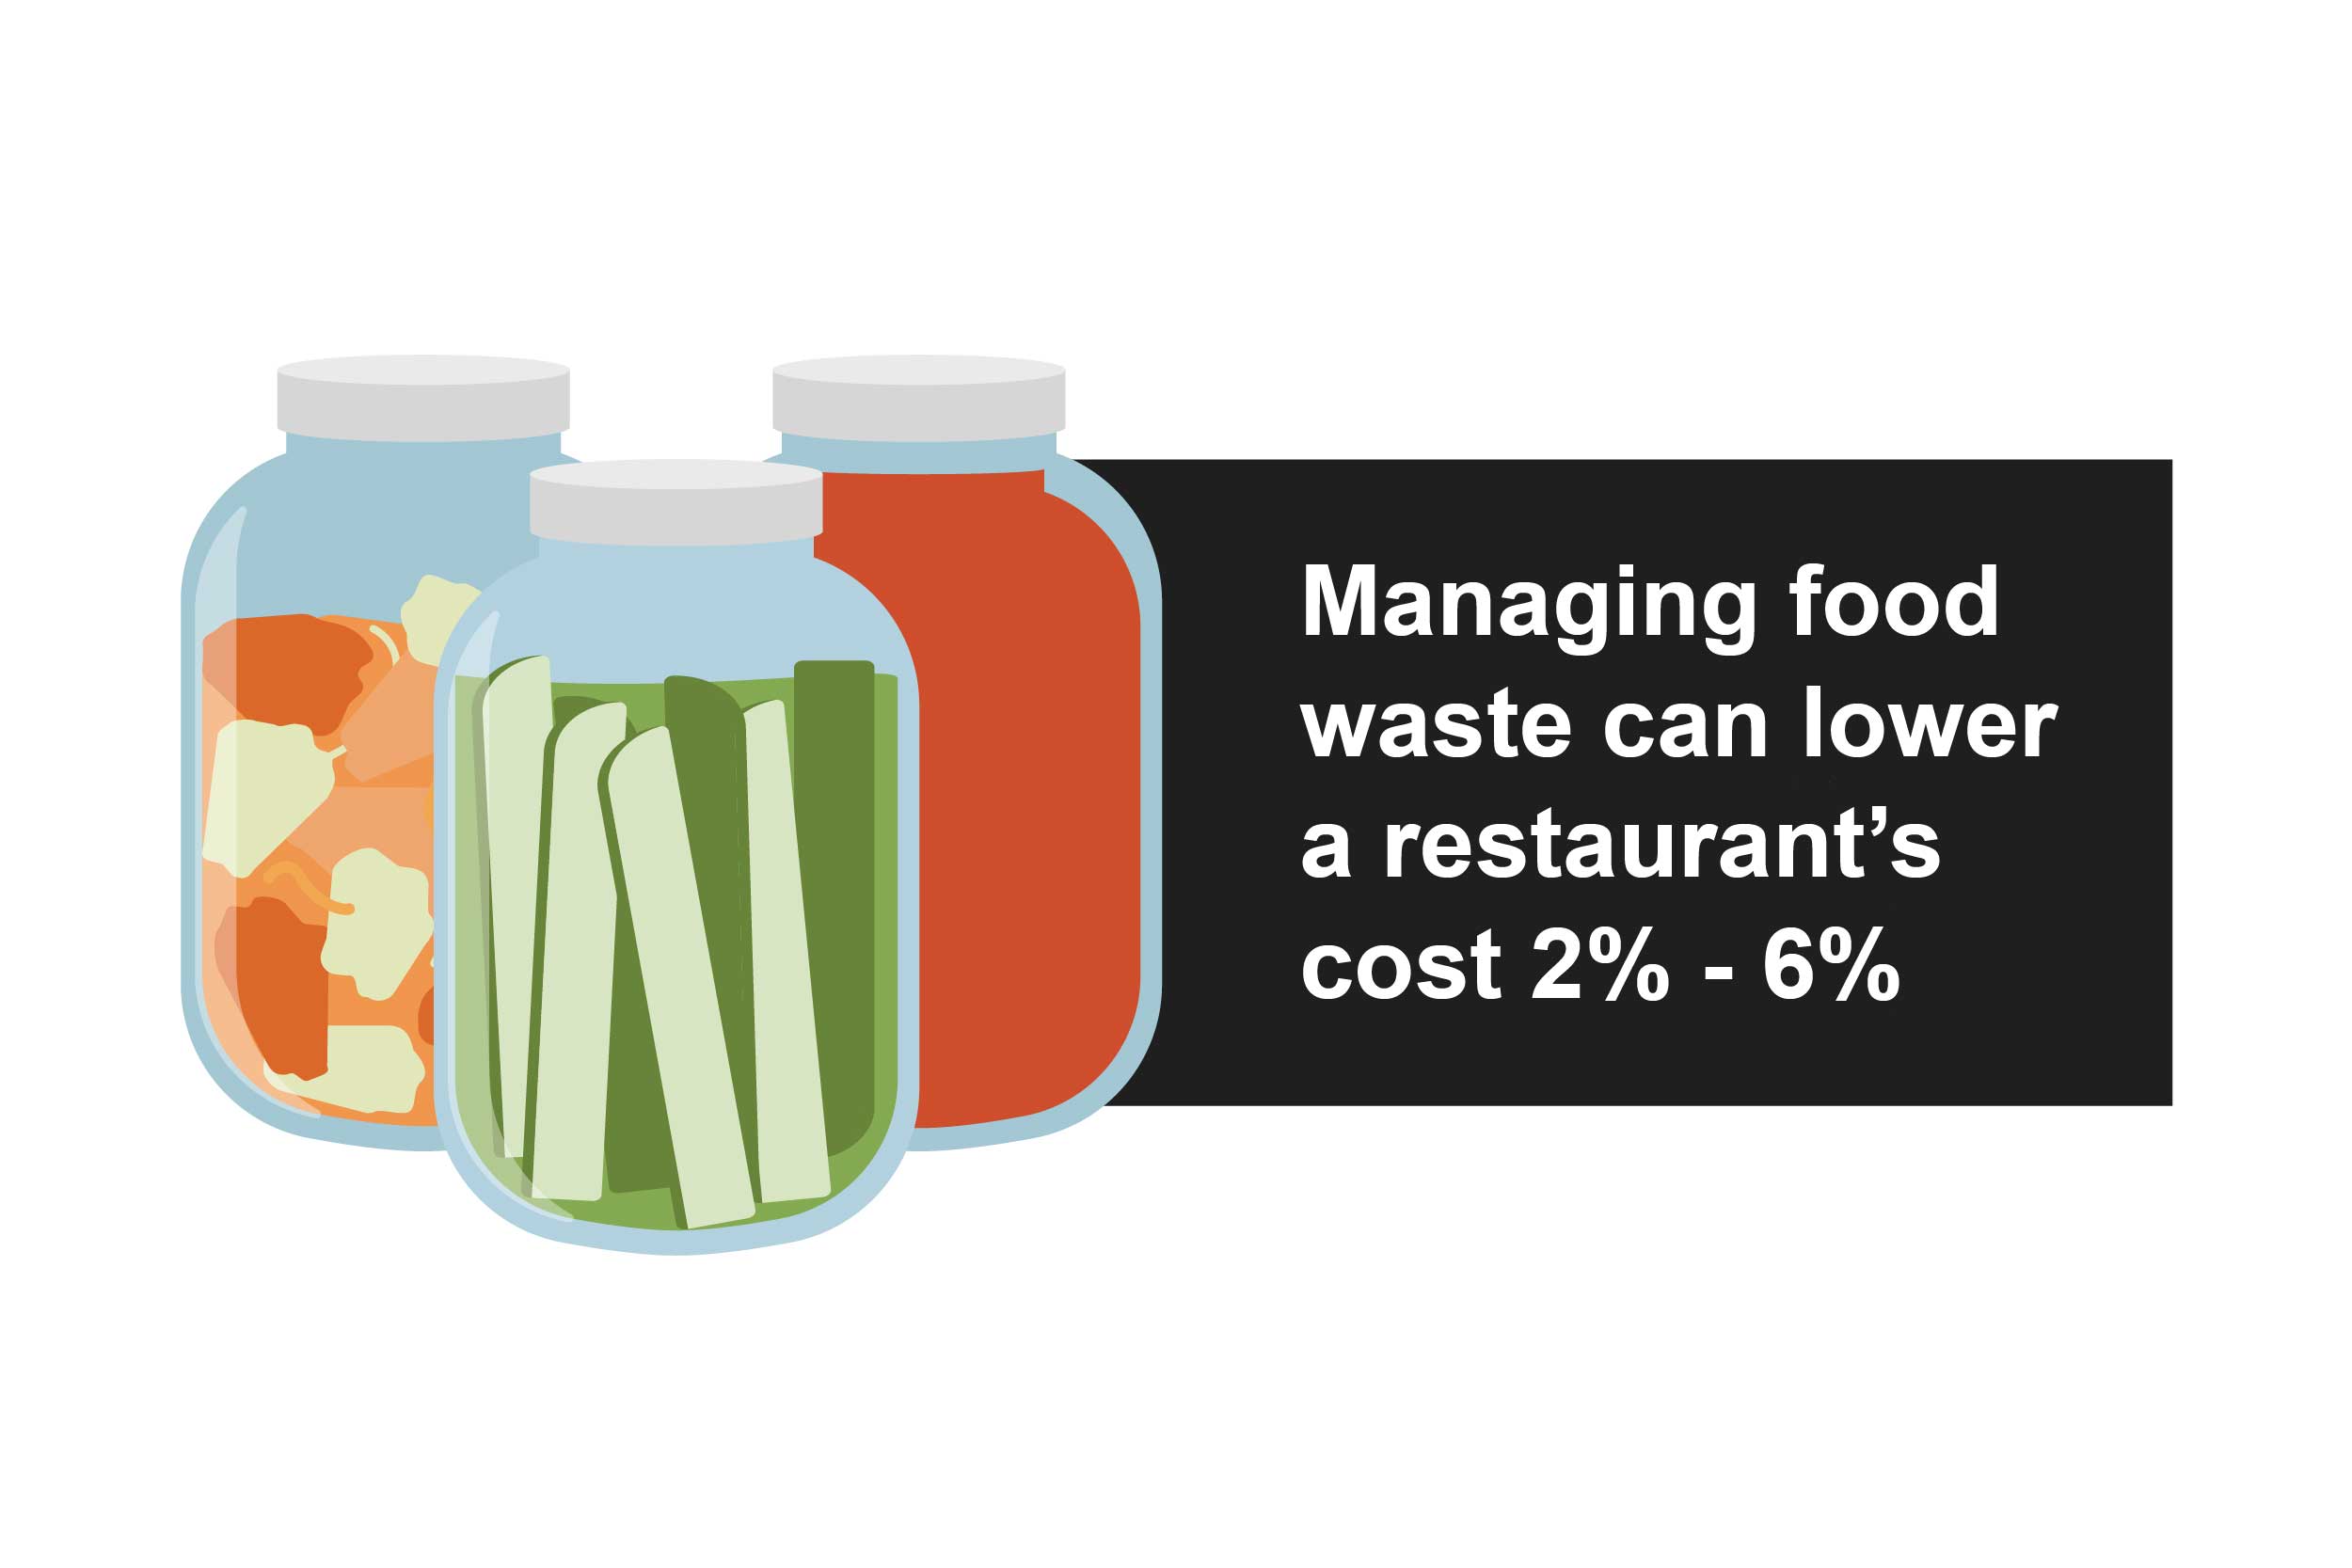 Managing food waste can lower a restaurant's cost two to six percent.